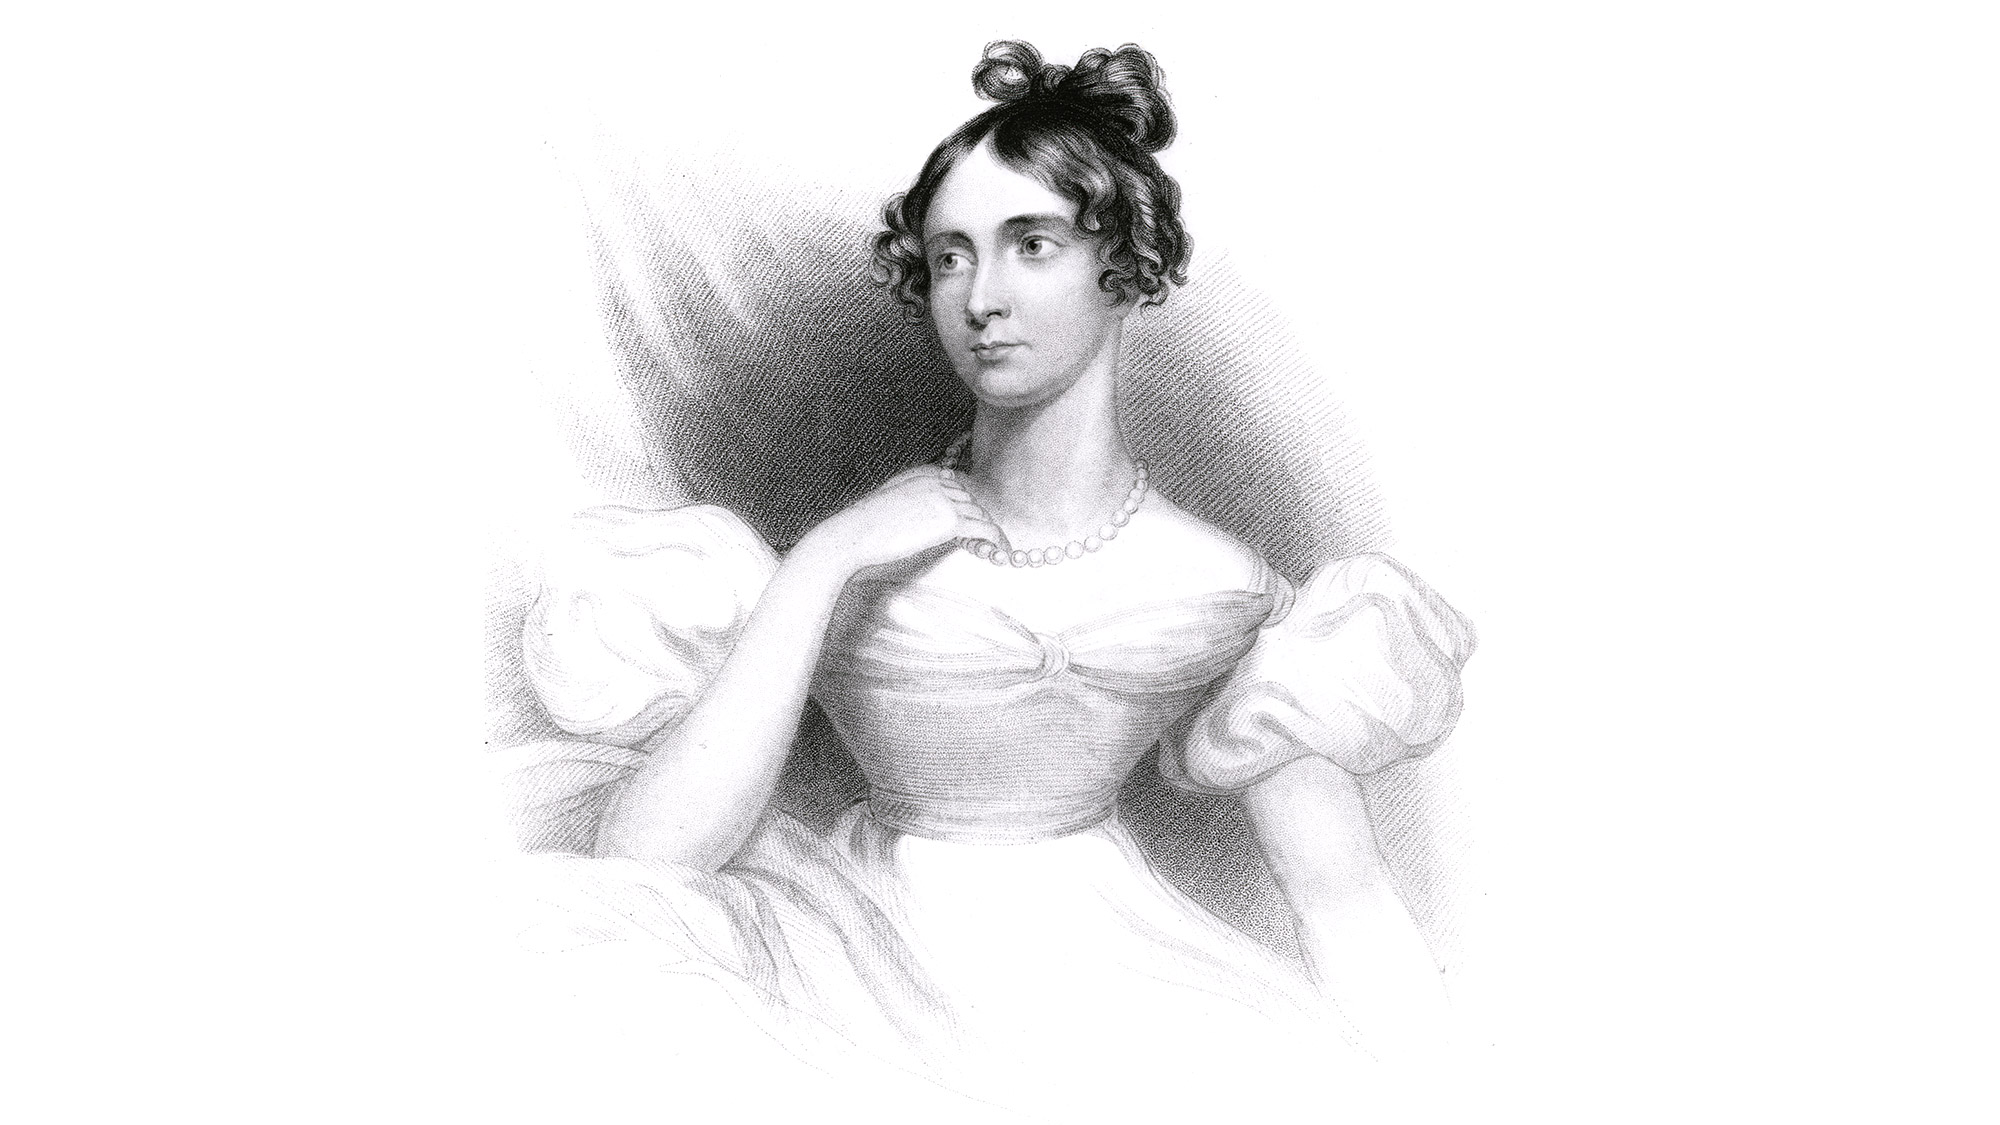 An illustration of Ada Lovelace, who is considered the world's first computer programmer